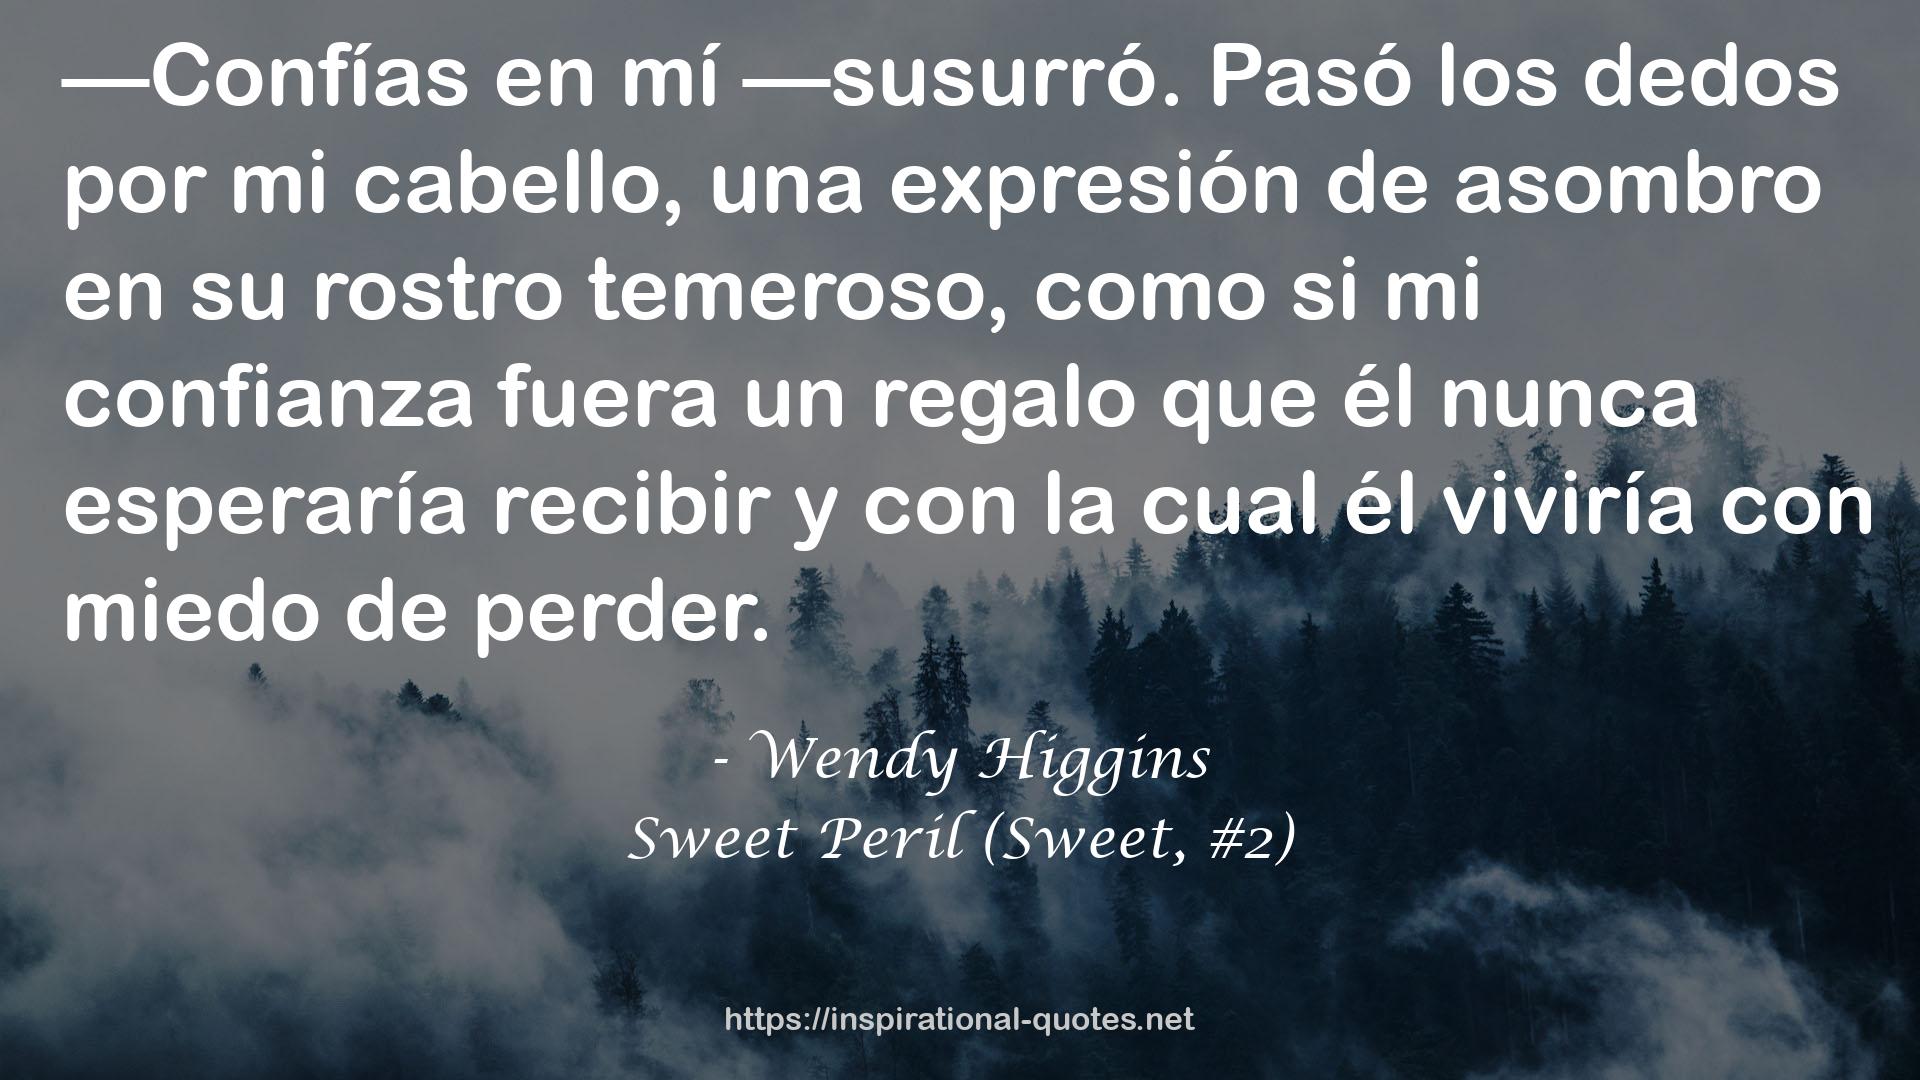 Wendy Higgins QUOTES